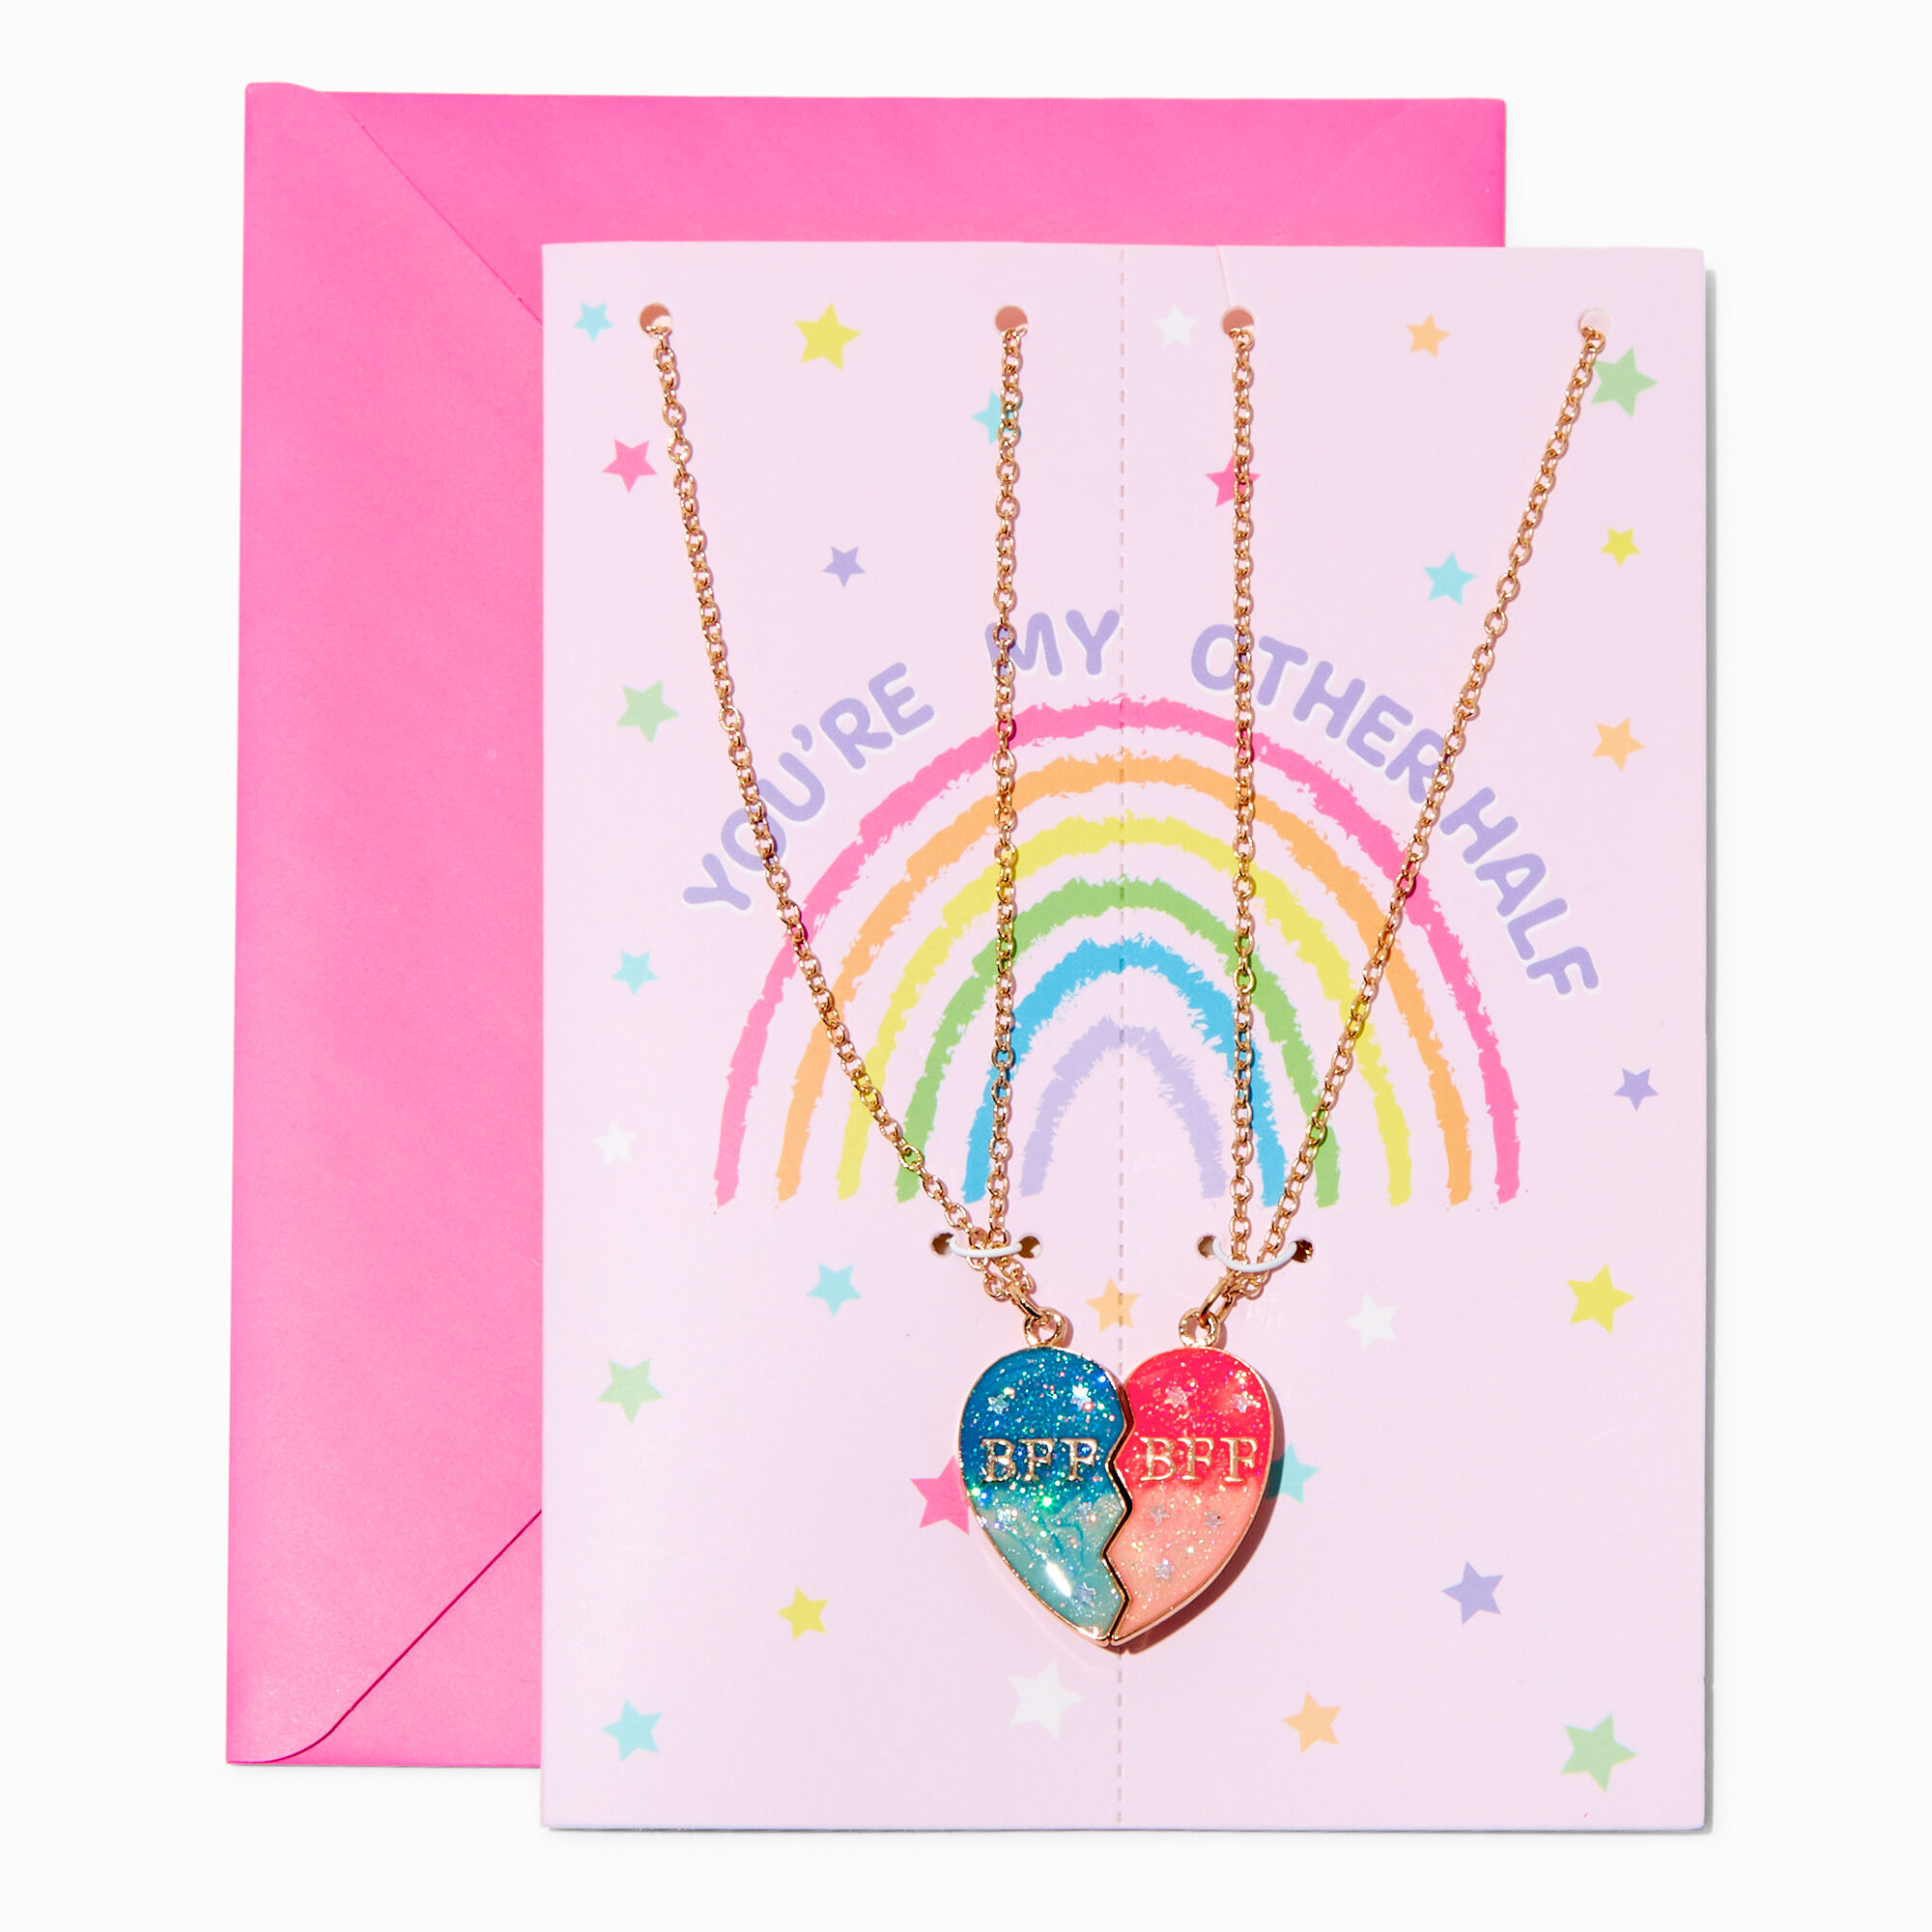 View Claires Birthday Card Best Friends Glitter Heart Pendant Necklace Set 3 Pack Gold information